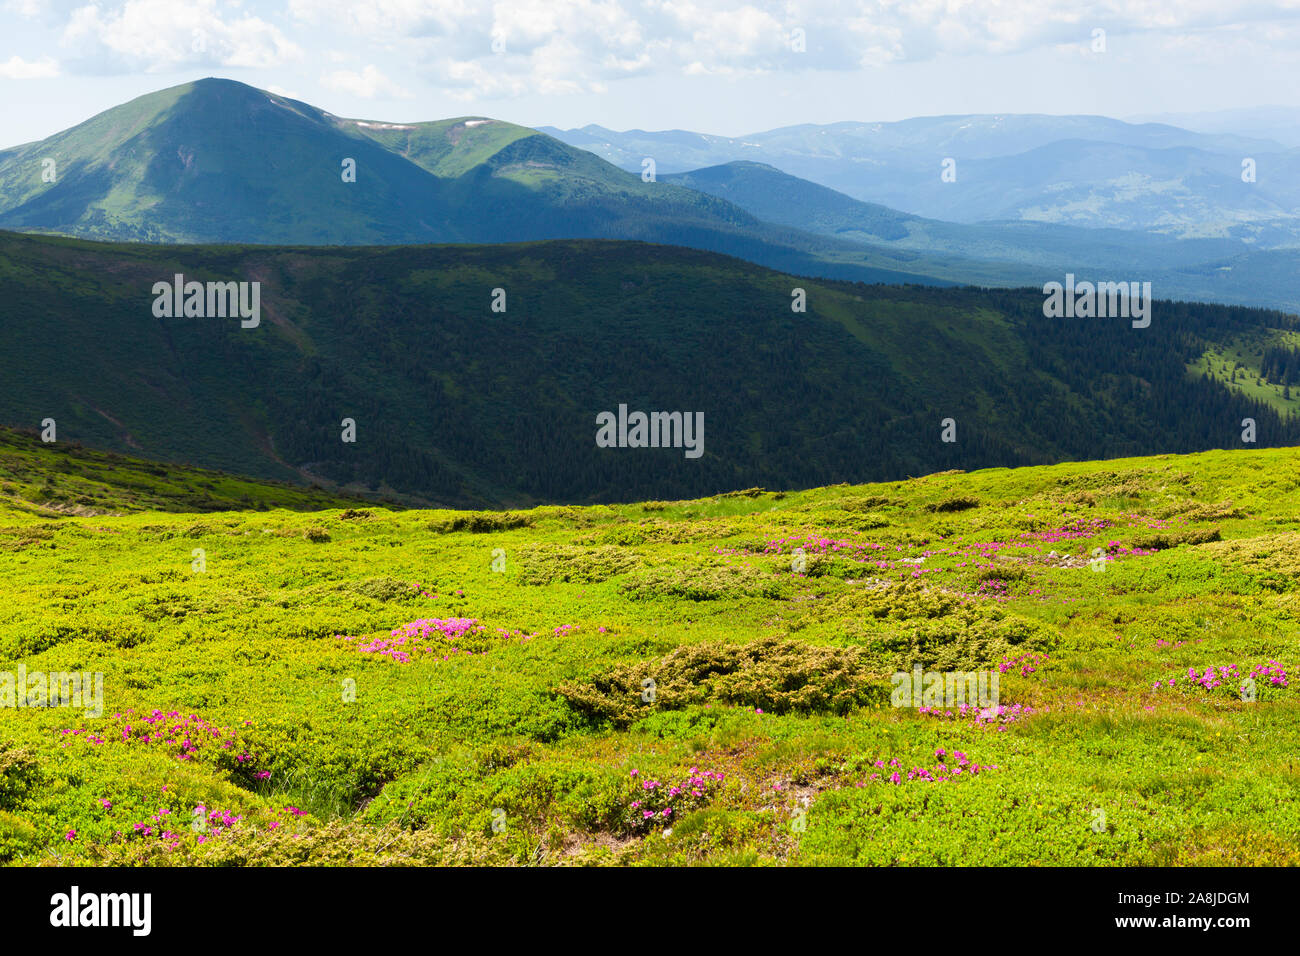 Beautiful contrasty landscape of the Carpathian mountains with blooming flowers from mountain Hoverla Stock Photo